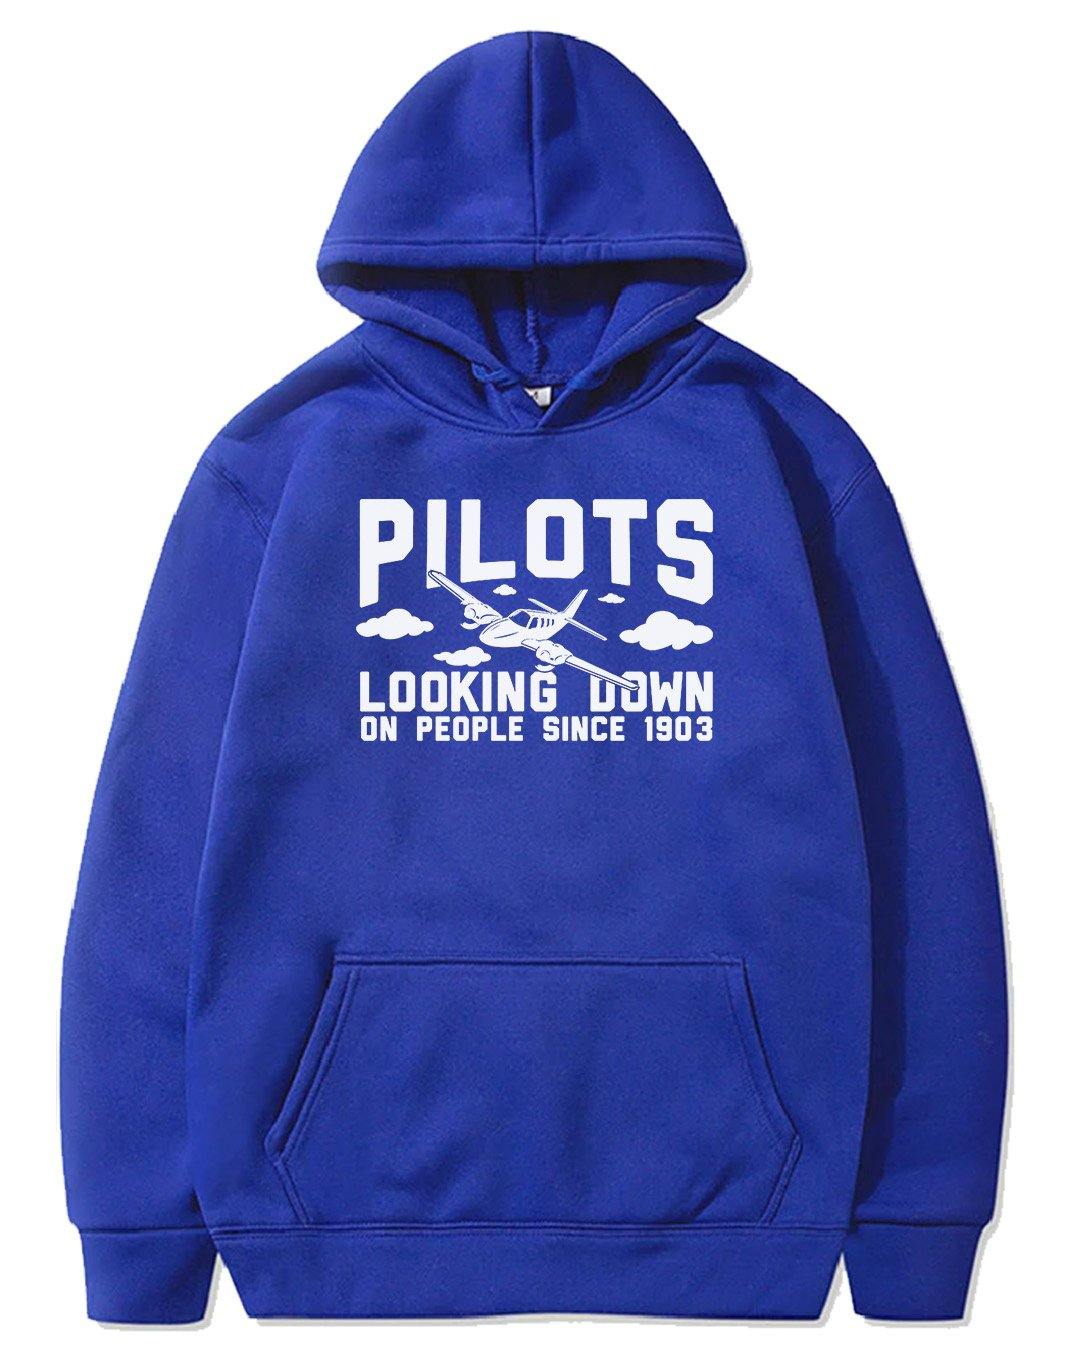 PILOTS LOOKING DOWN ON PEOPLE SINCE 1903 PULLOVER THE AV8R